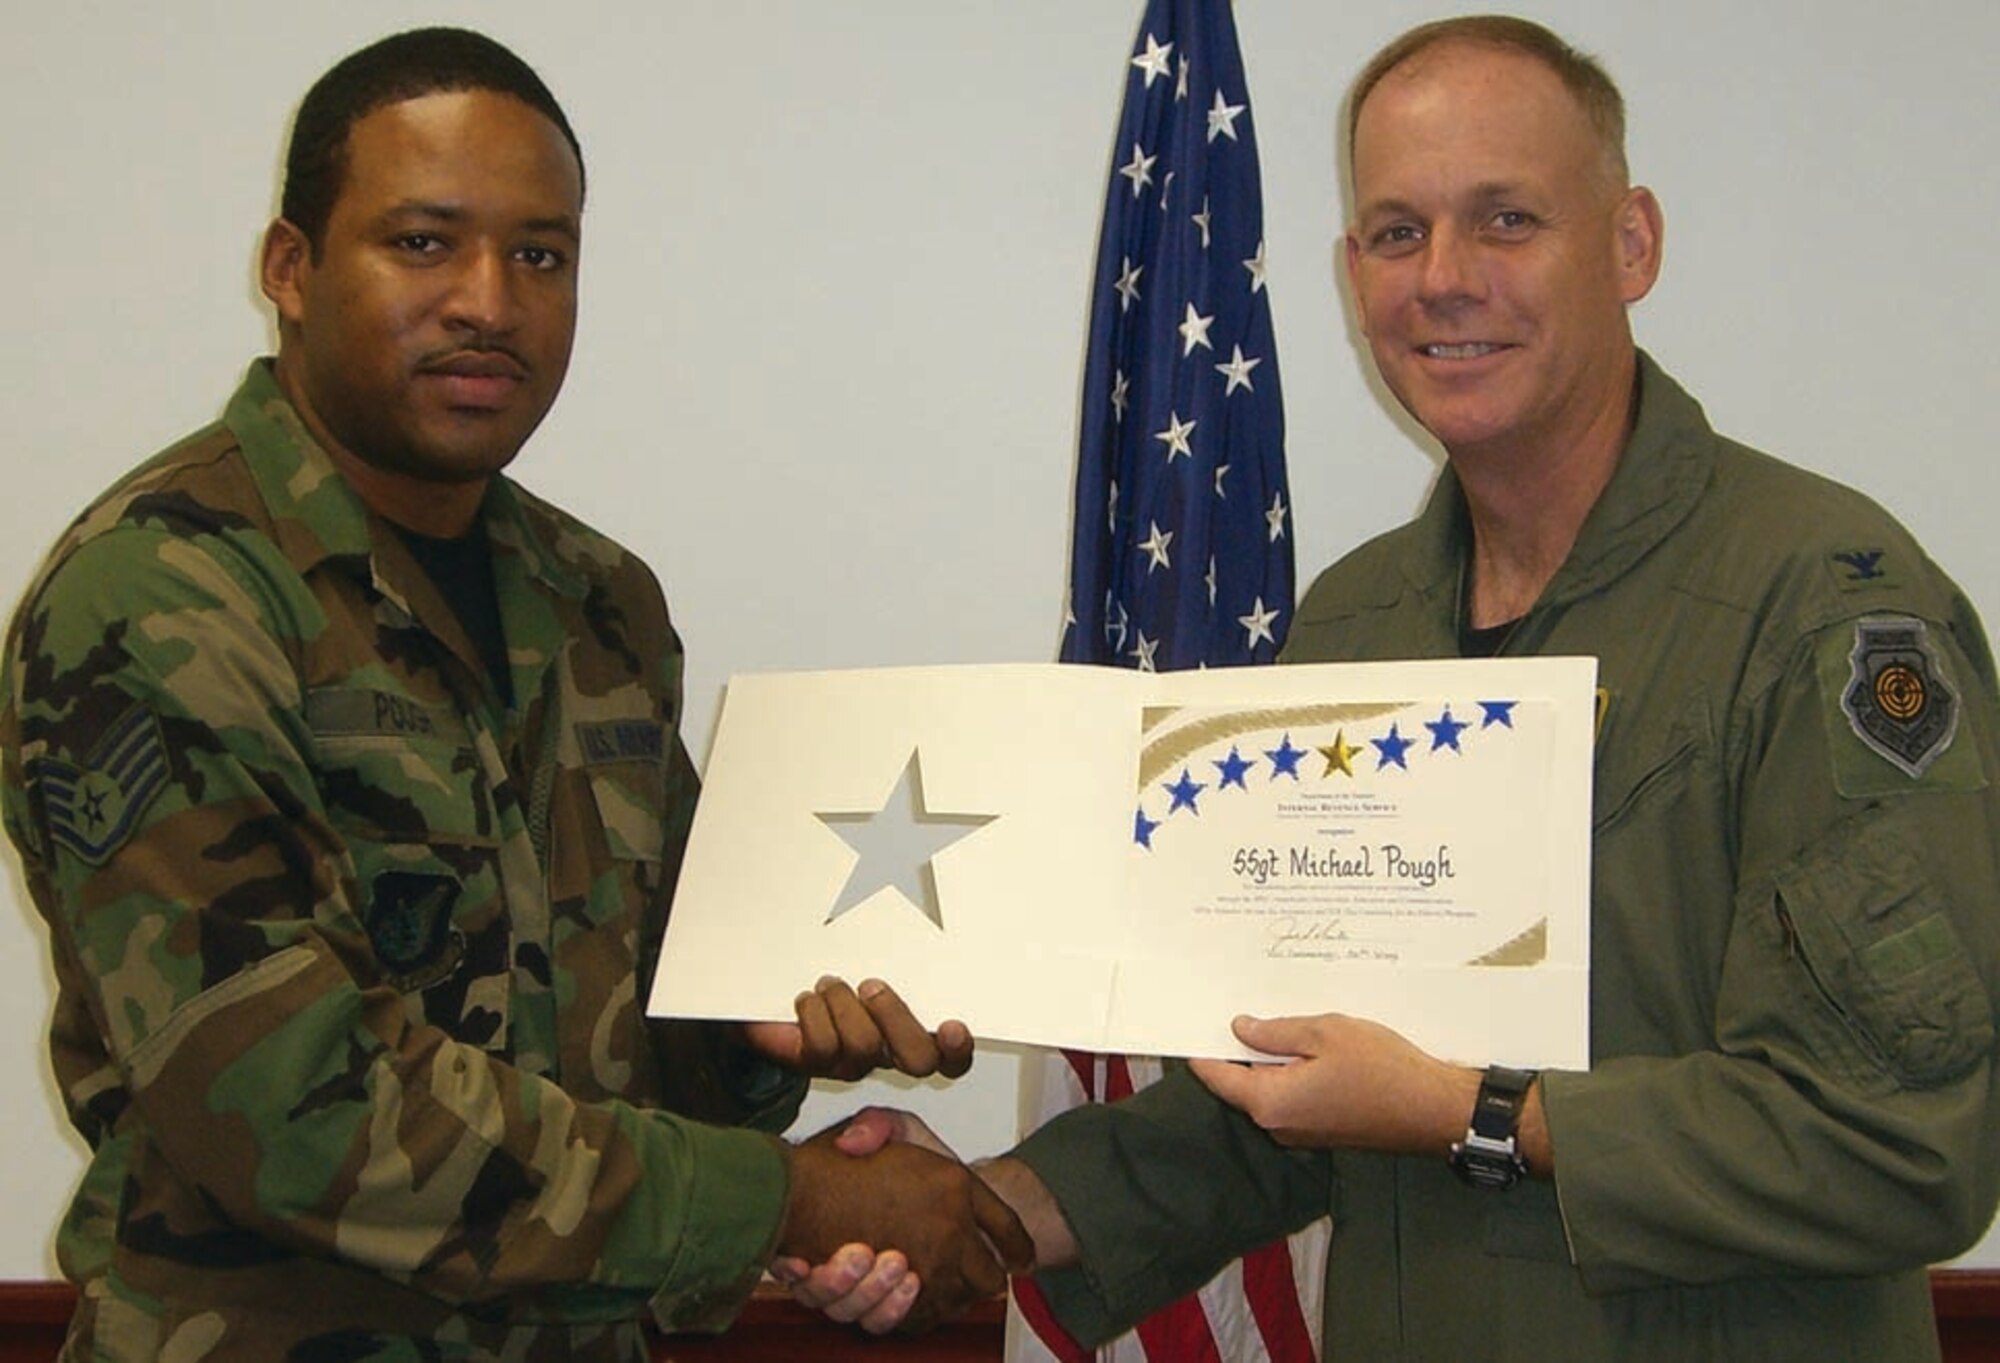 Col. Joel Westa congratulates Staff Sgt. Michael Pough for his contributions to the tax center.  Sergeant Pough was the top tax preparation volunteer for the year.  